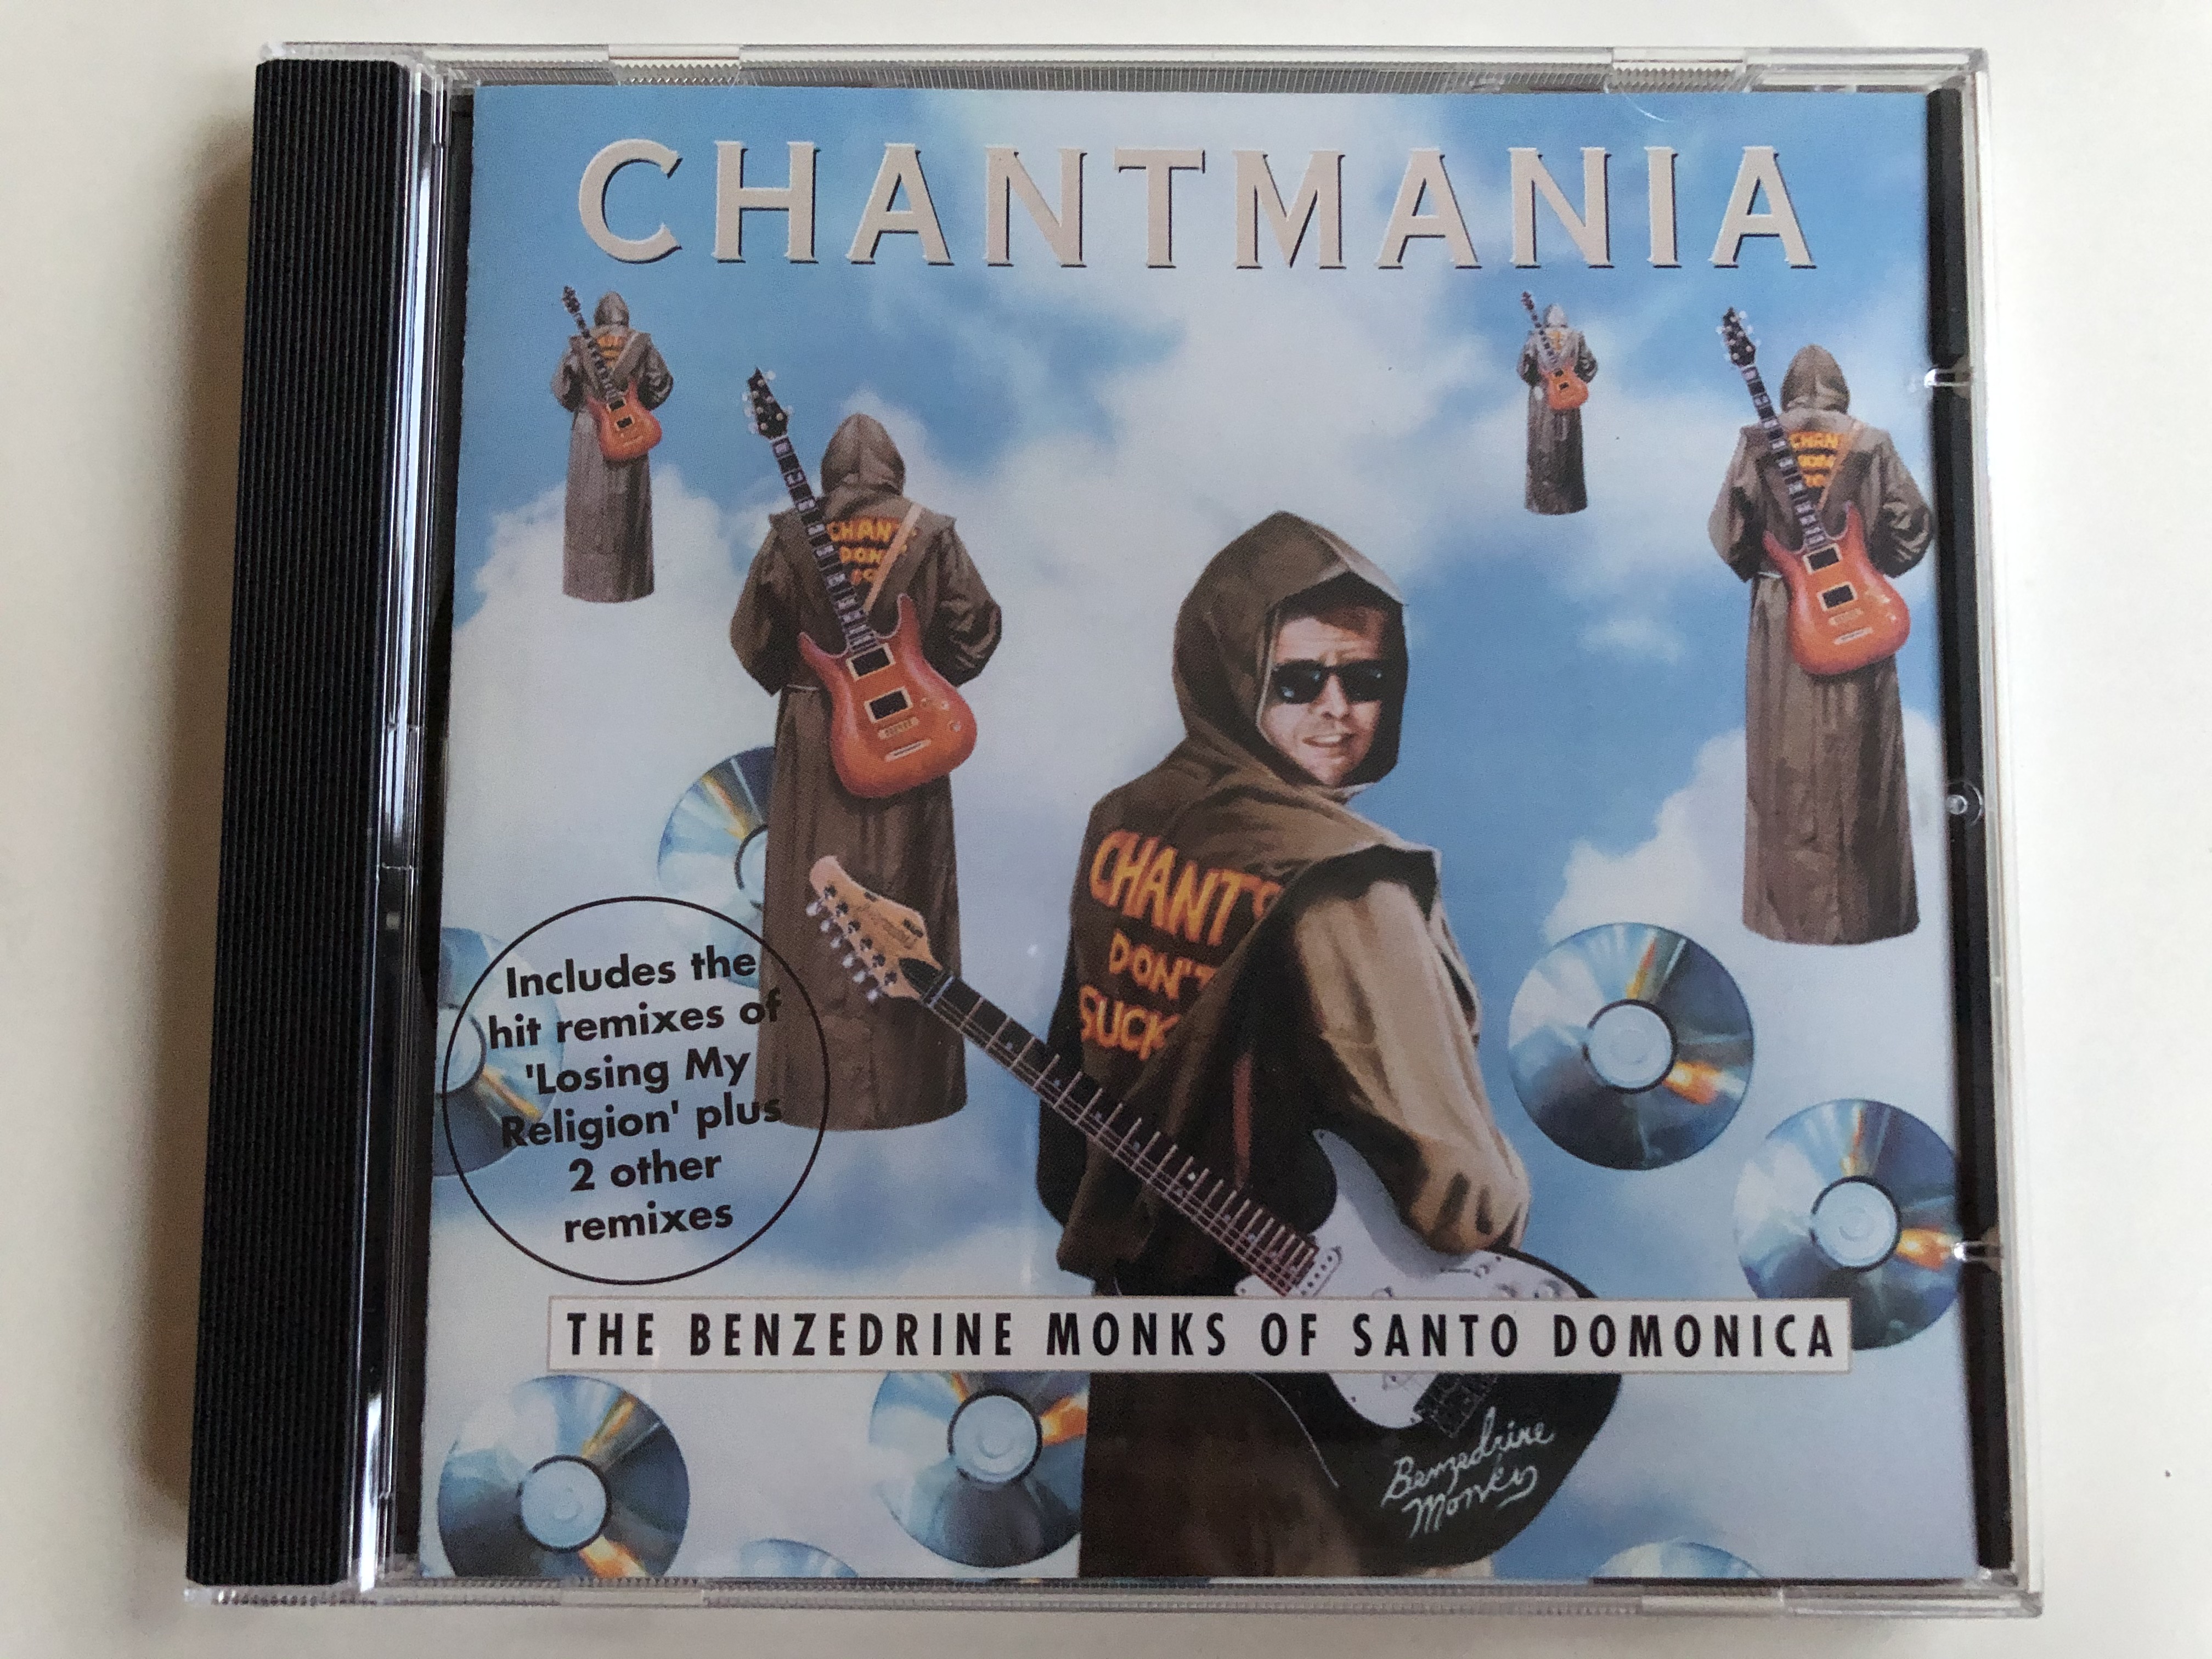 chantmania-the-benzedrine-monks-of-santo-domonica-includes-the-hit-remixes-of-losing-my-religion-plus-2-other-remixes-rhino-records-audio-cd-1994-8122-71395-2-1-.jpg